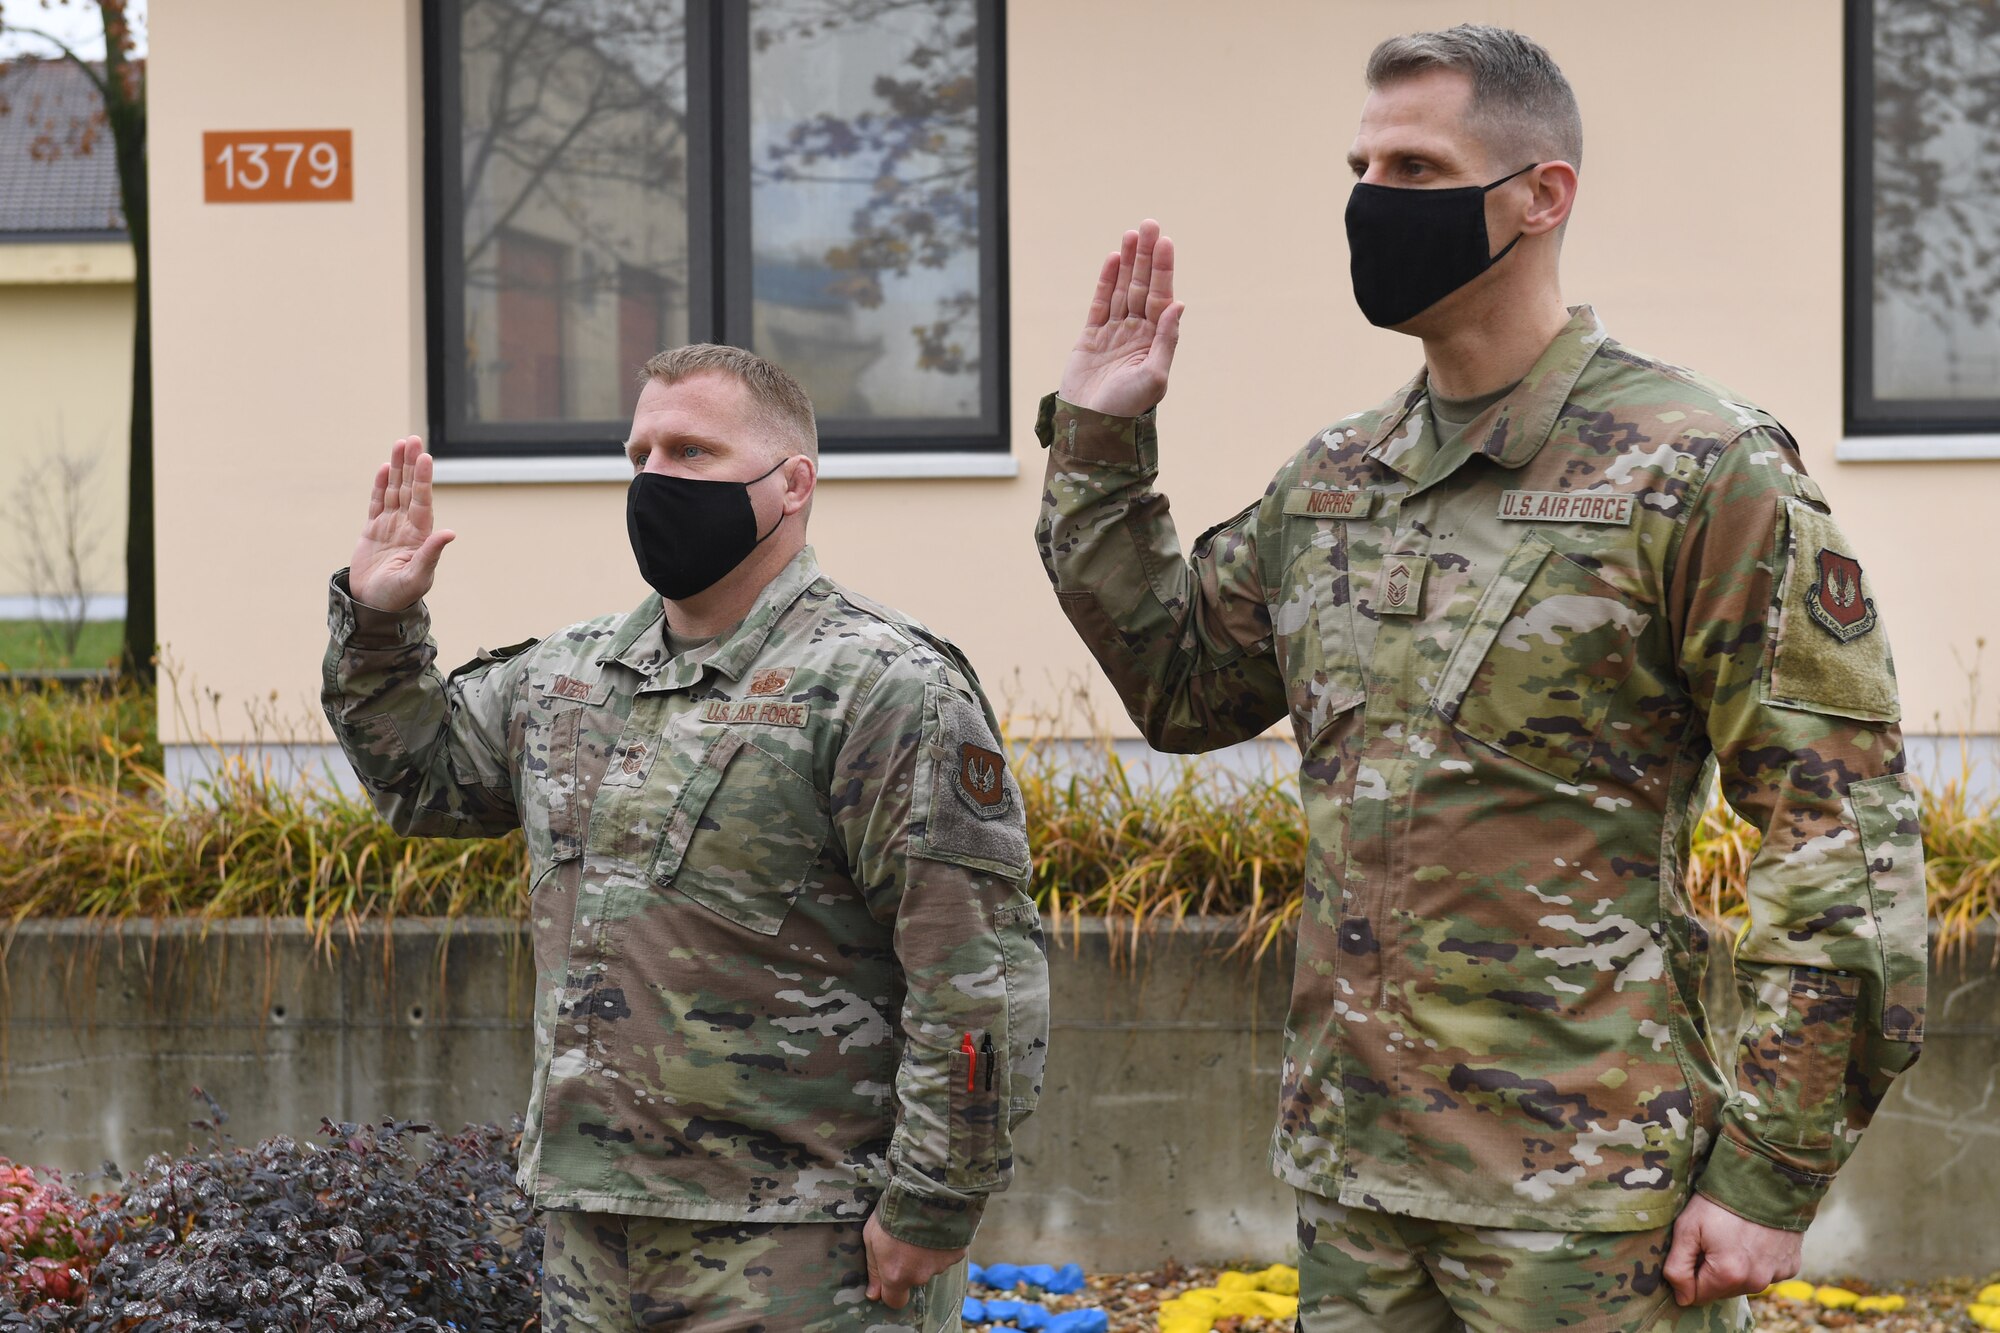 Senior Master Sgt. Sean Winters, 606th Air Control Squadron cyber operations and maintenance superintendent, left, and Senior Master Sgt. Paul Norris, 606th ACS cyber operations and maintenance operations superintendent, right, are sworn into the U.S. Space Force at Aviano Air Base Italy, Dec. 3, 2020. Winters and Norris were the first Airmen to enlist into the U.S. Space Force while stationed at Aviano.